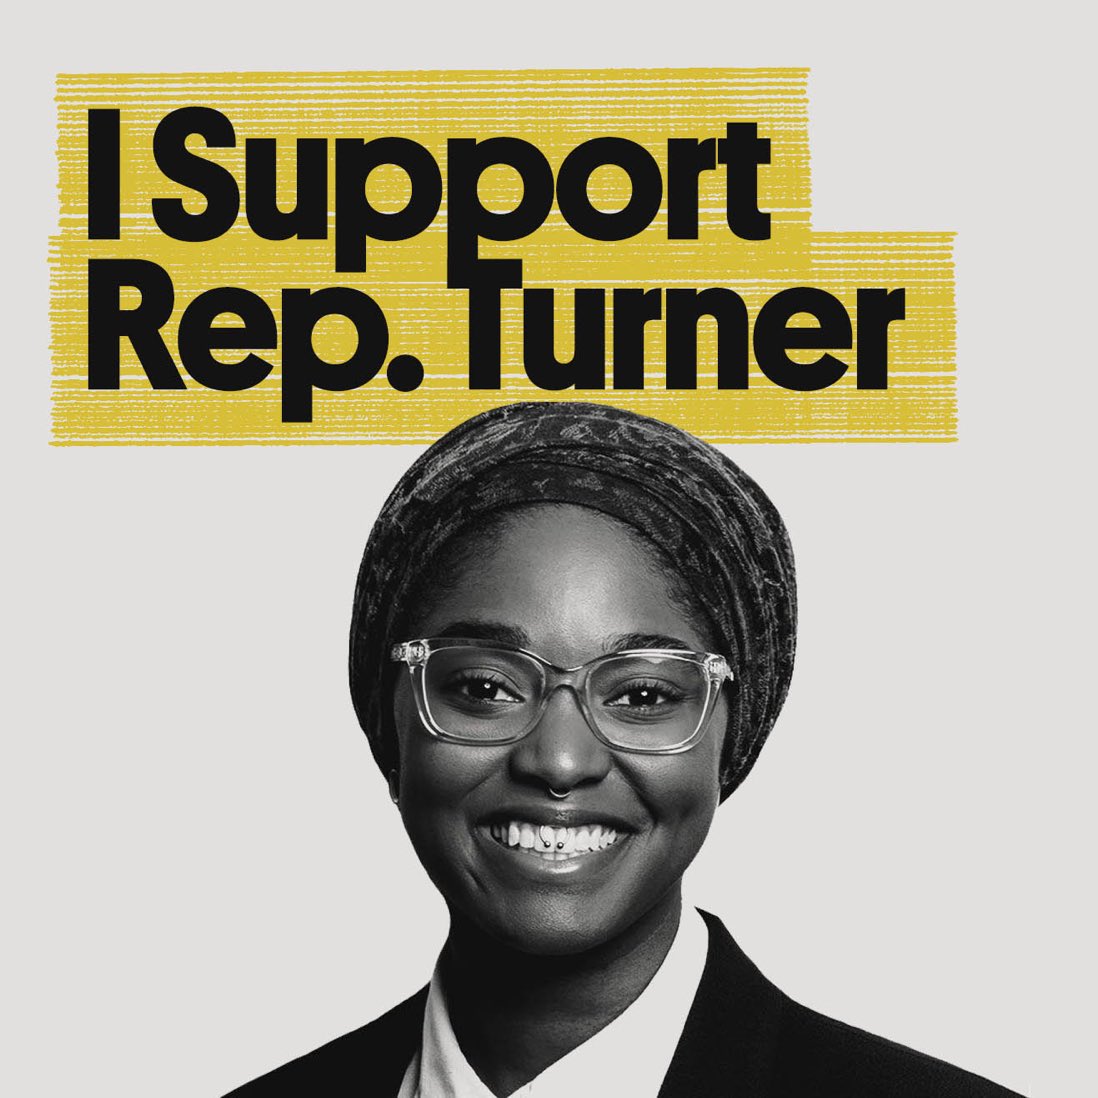 I continue to grow and learn from @RepMaureeTurner. I get to be a thought partner on how to get free with them and continue to be inspired. Silencing the voice of Black folks is nothing new for the #okleg, I just hope we all refuse to let them.